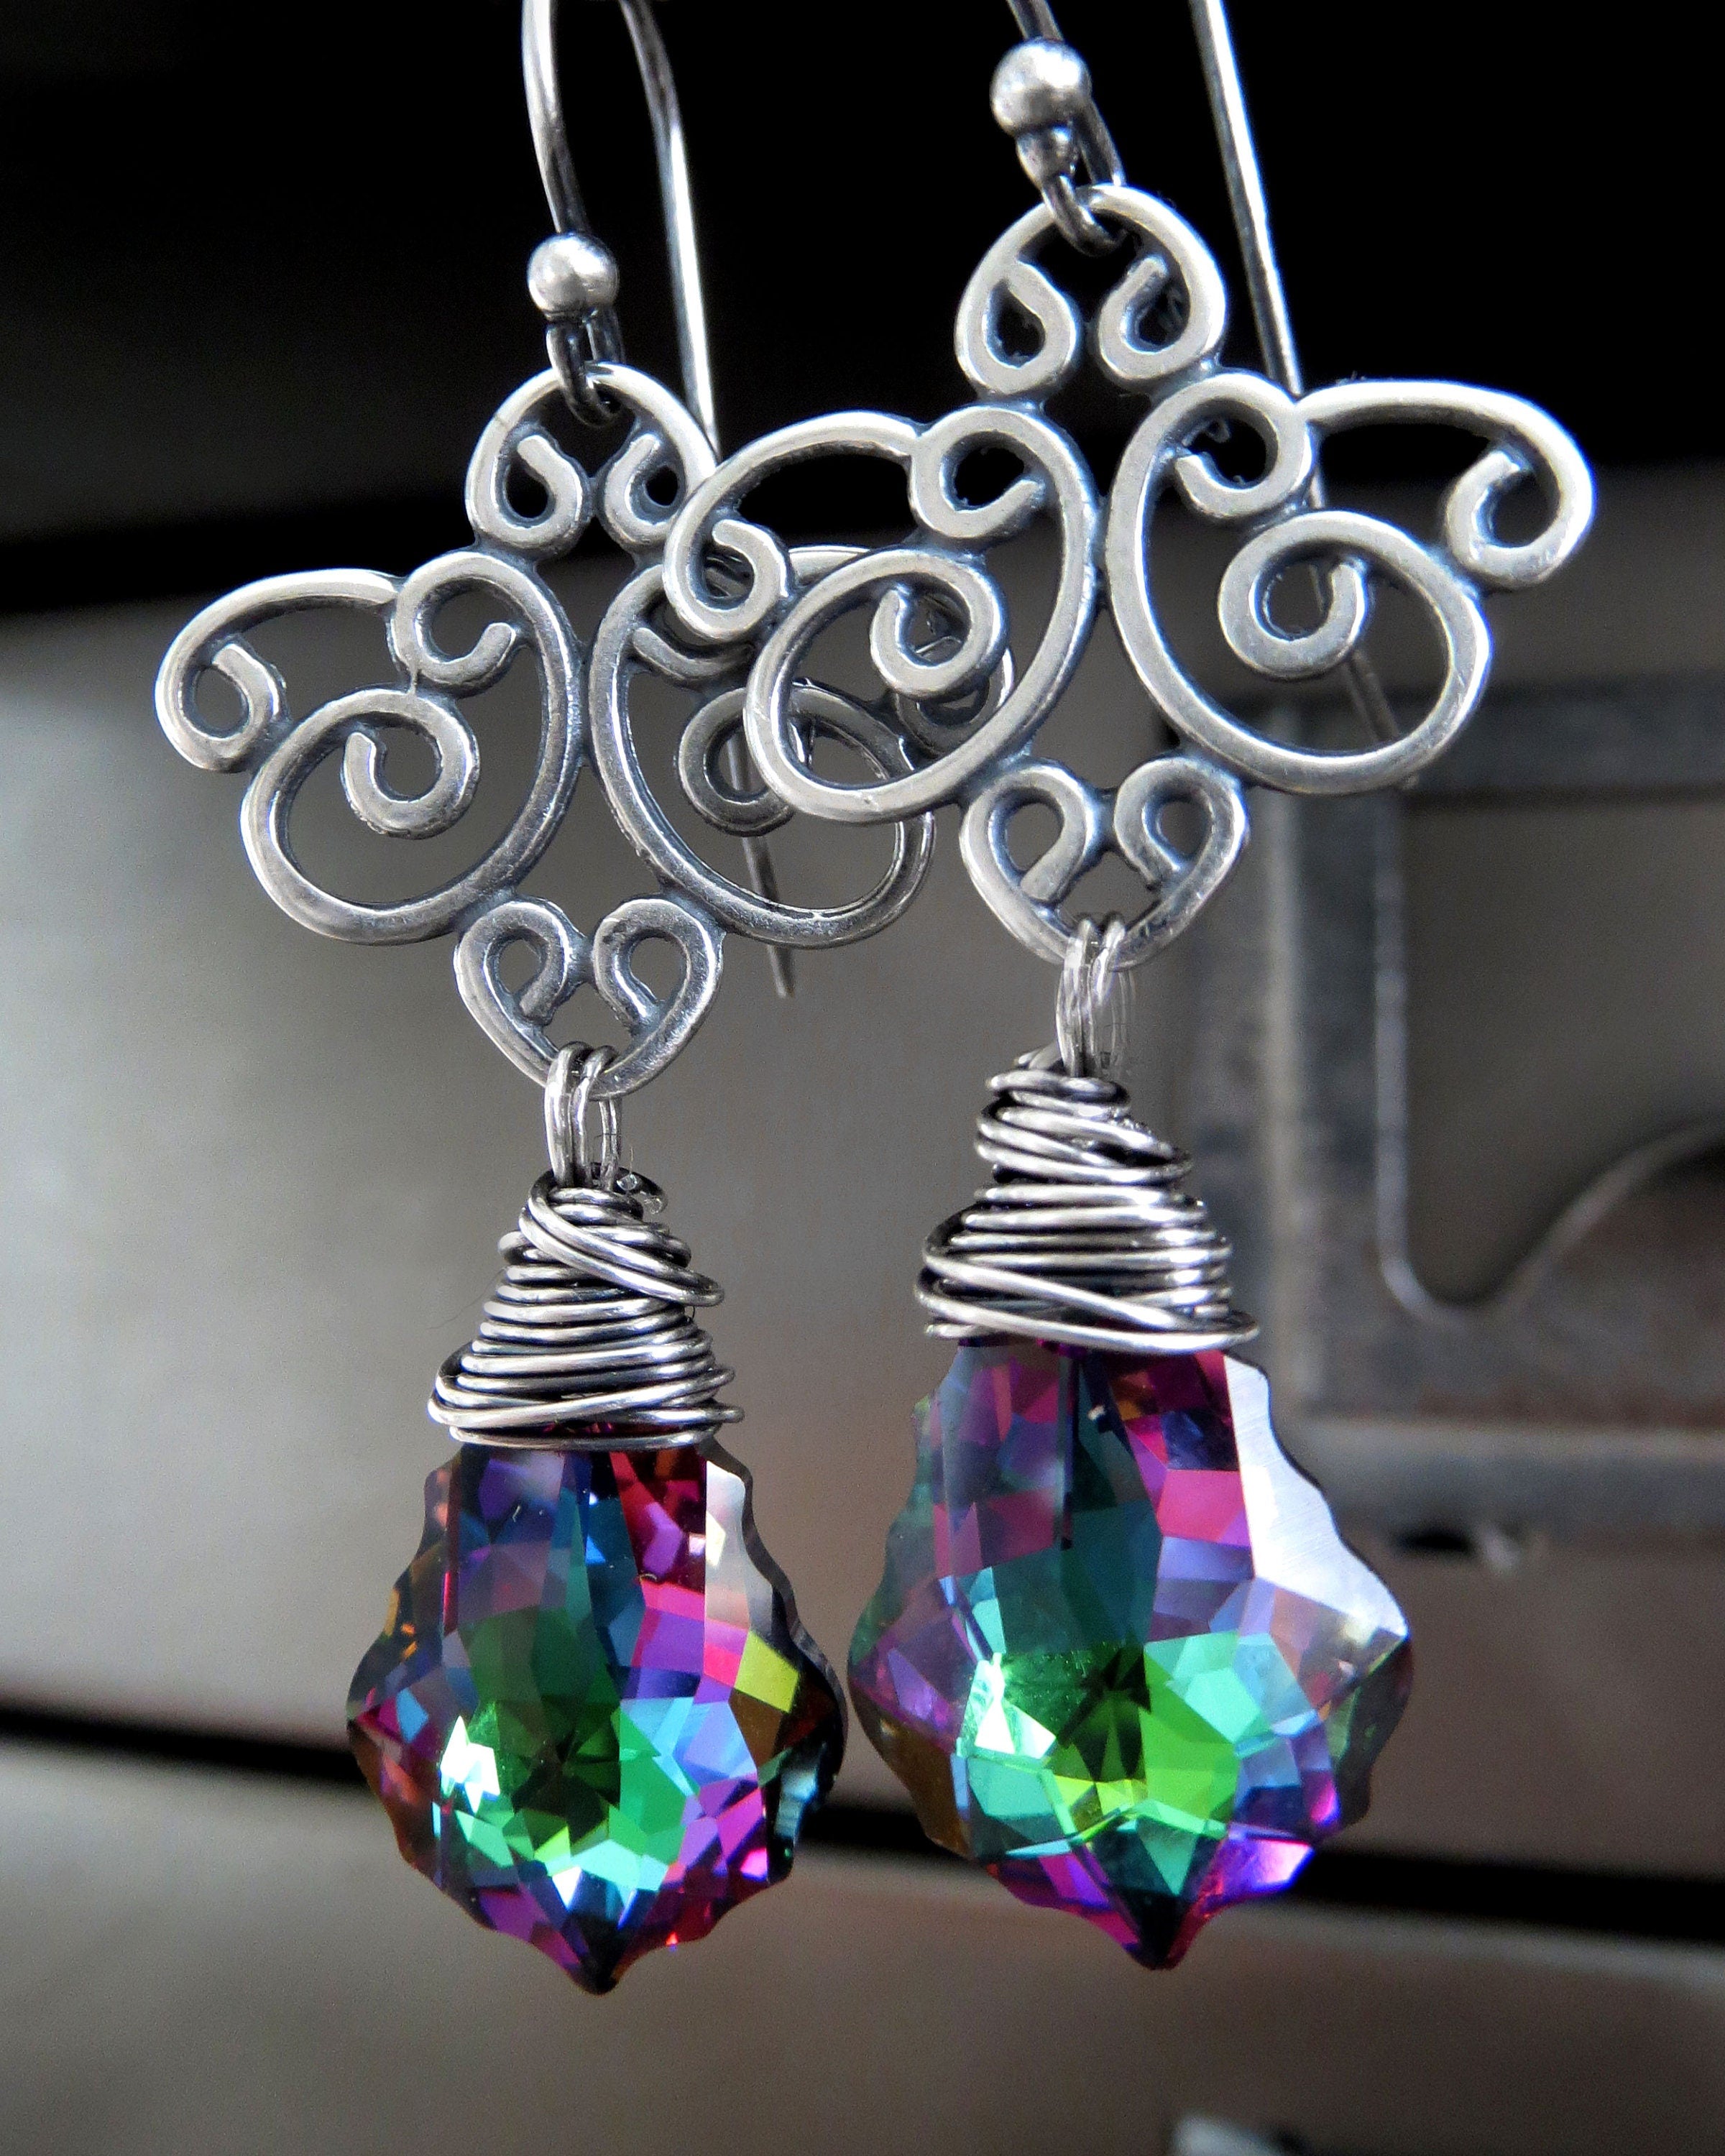 Good WITCH, Bad WITCH: Wicked Swarovski Crystal Earrings in Deep Green, Violet, Magenta, Blue - Wicked Witch Goth Gothic Halloween Jewelry